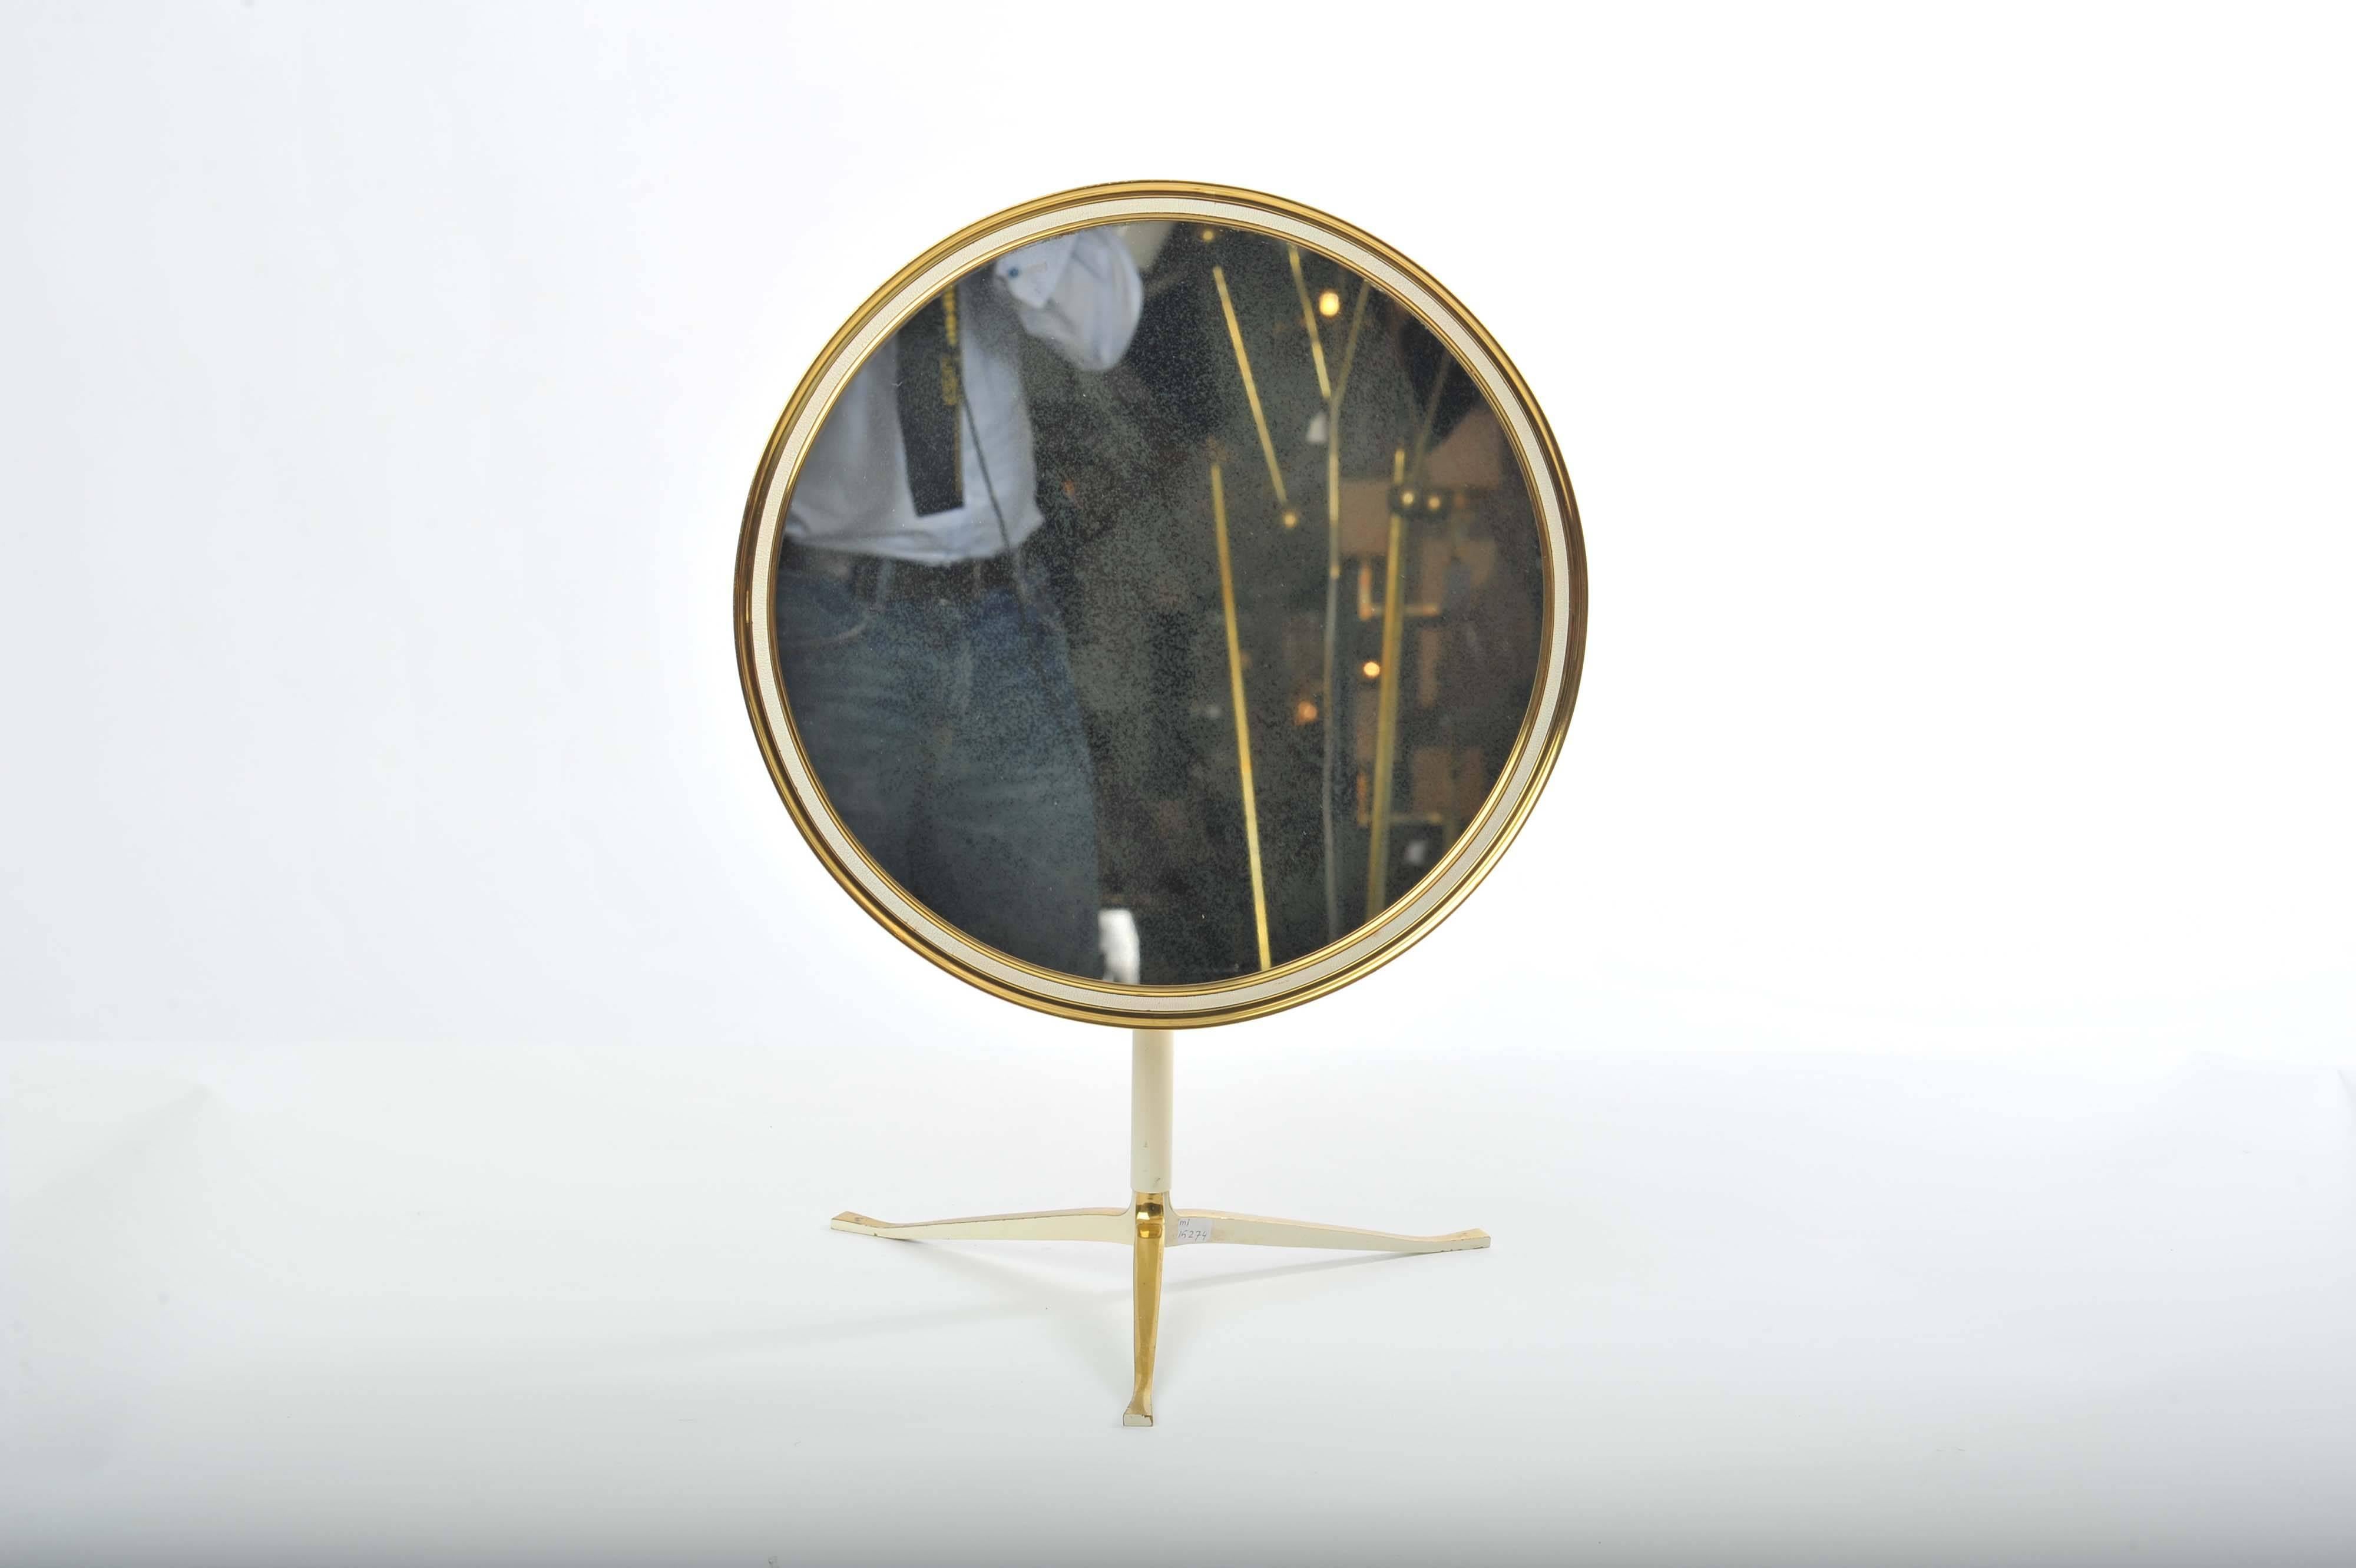 Elegant adjustable table mirror in brass with creme edging sits on tripod legs.